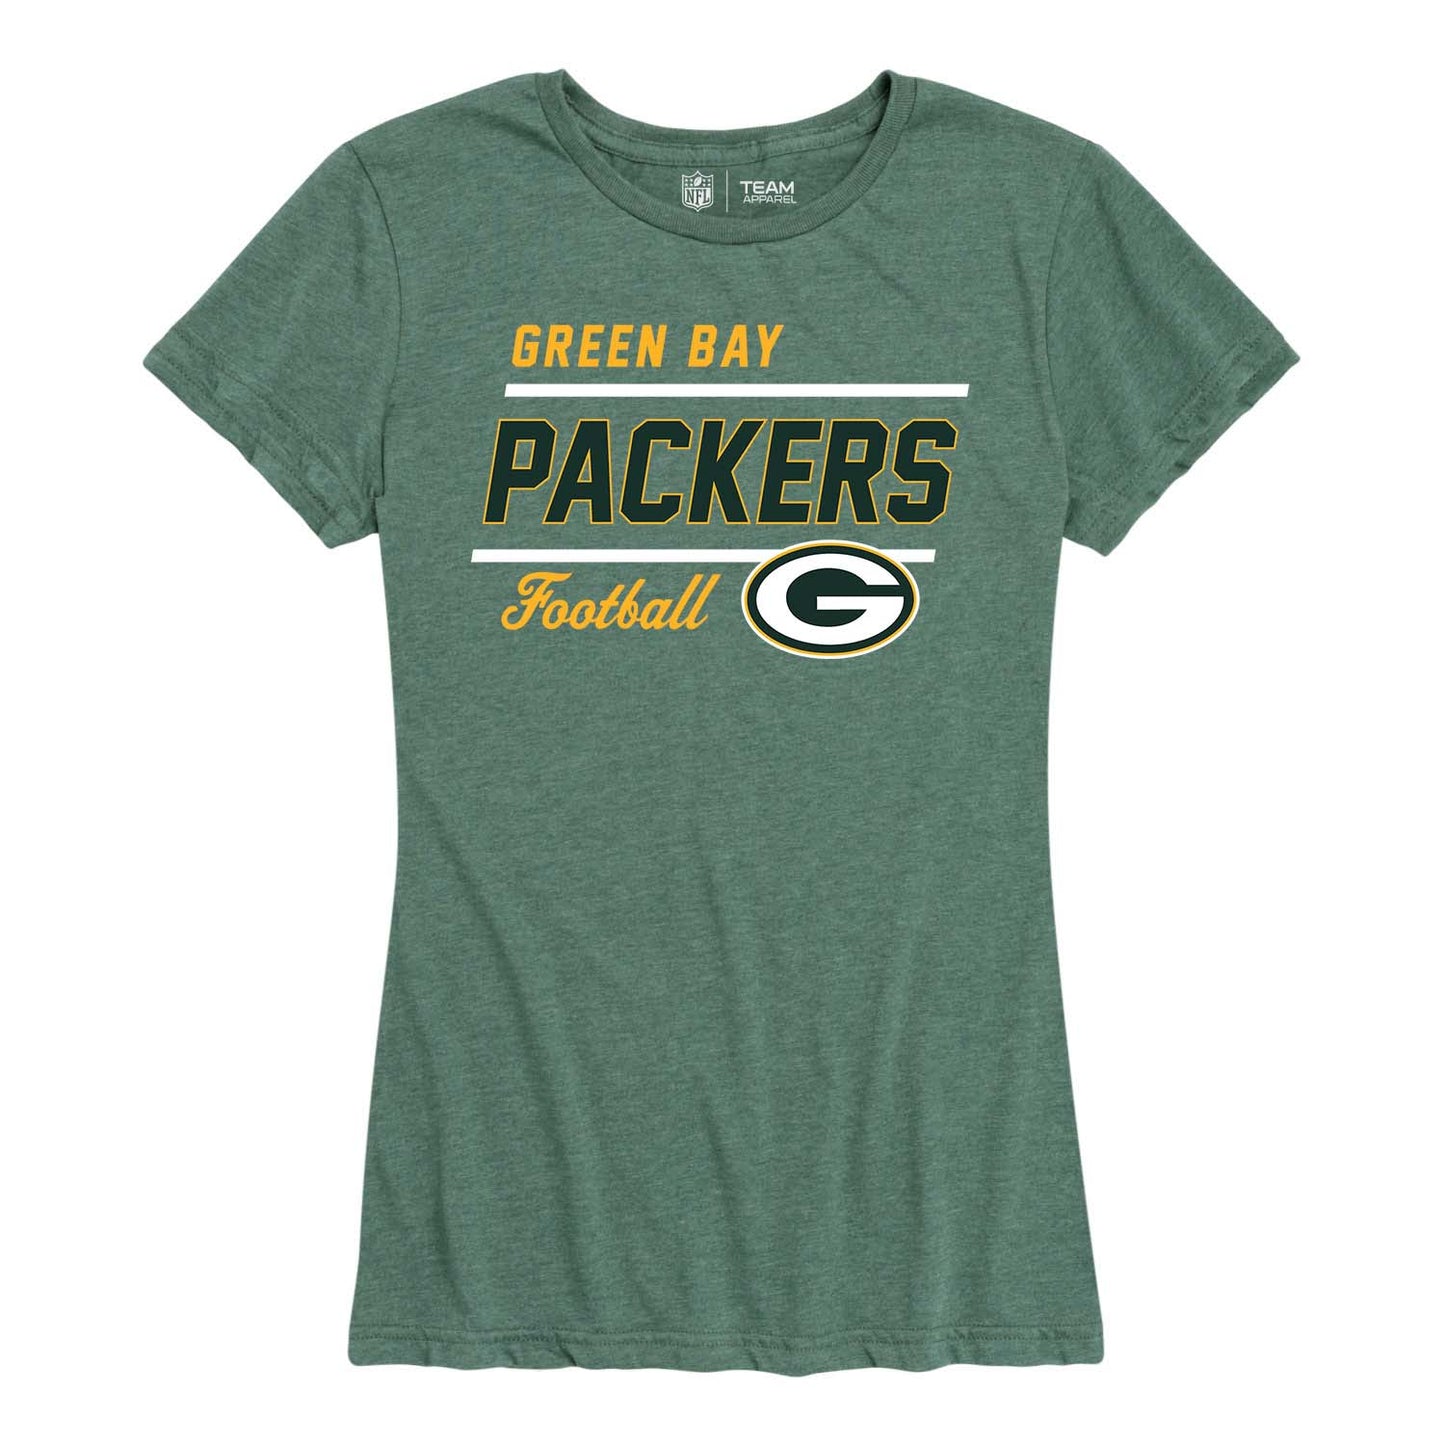 Green Bay Packers NFL Gameday Women's Relaxed Fit T-shirt - Team Color